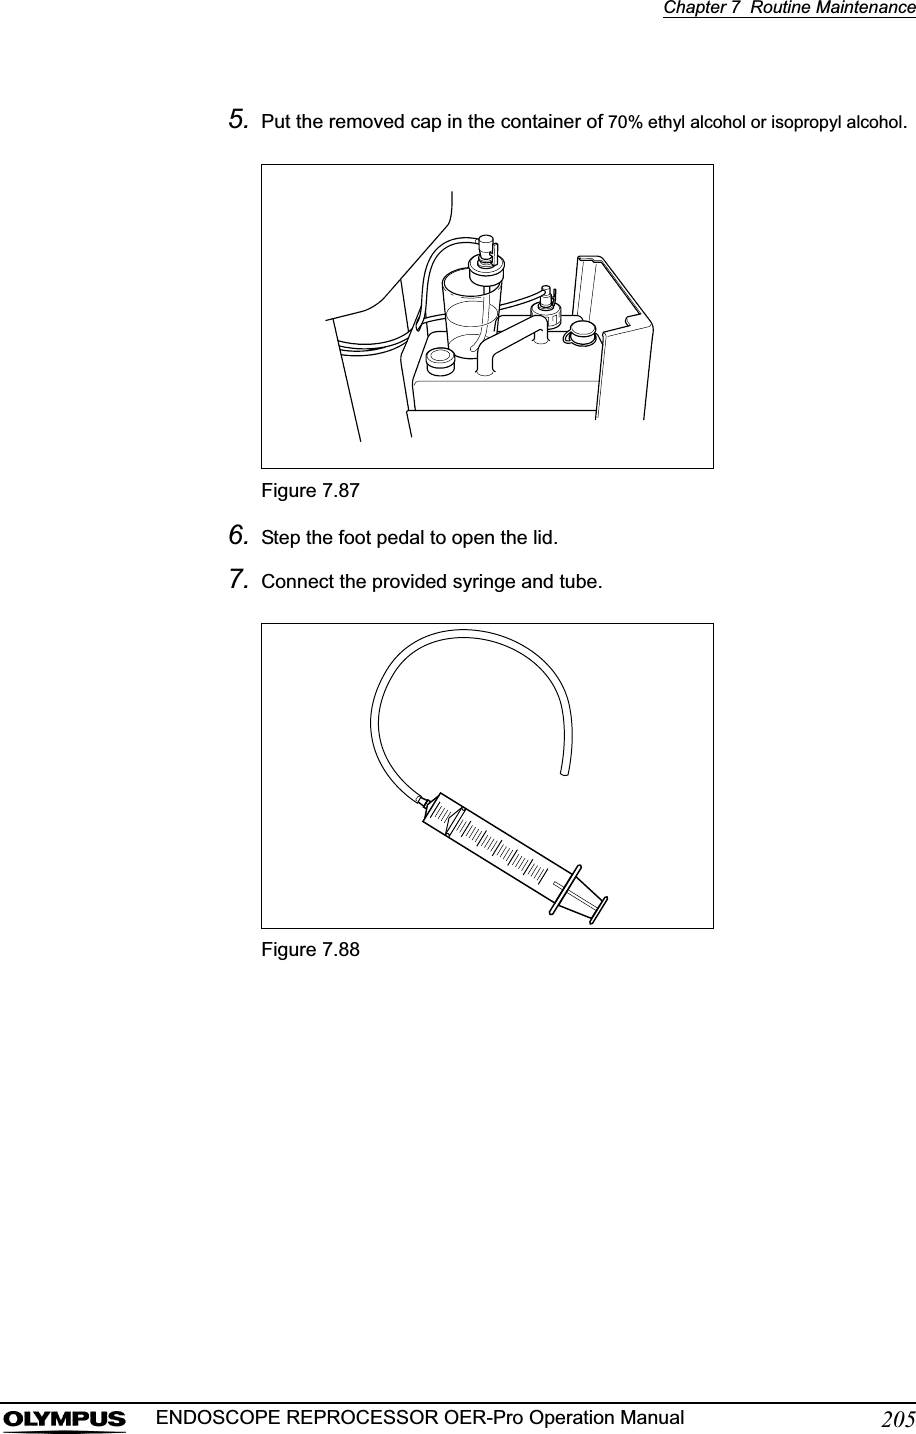 Chapter 7  Routine Maintenance205ENDOSCOPE REPROCESSOR OER-Pro Operation Manual5. Put the removed cap in the container of 70% ethyl alcohol or isopropyl alcohol.Figure 7.876. Step the foot pedal to open the lid.7. Connect the provided syringe and tube.Figure 7.88